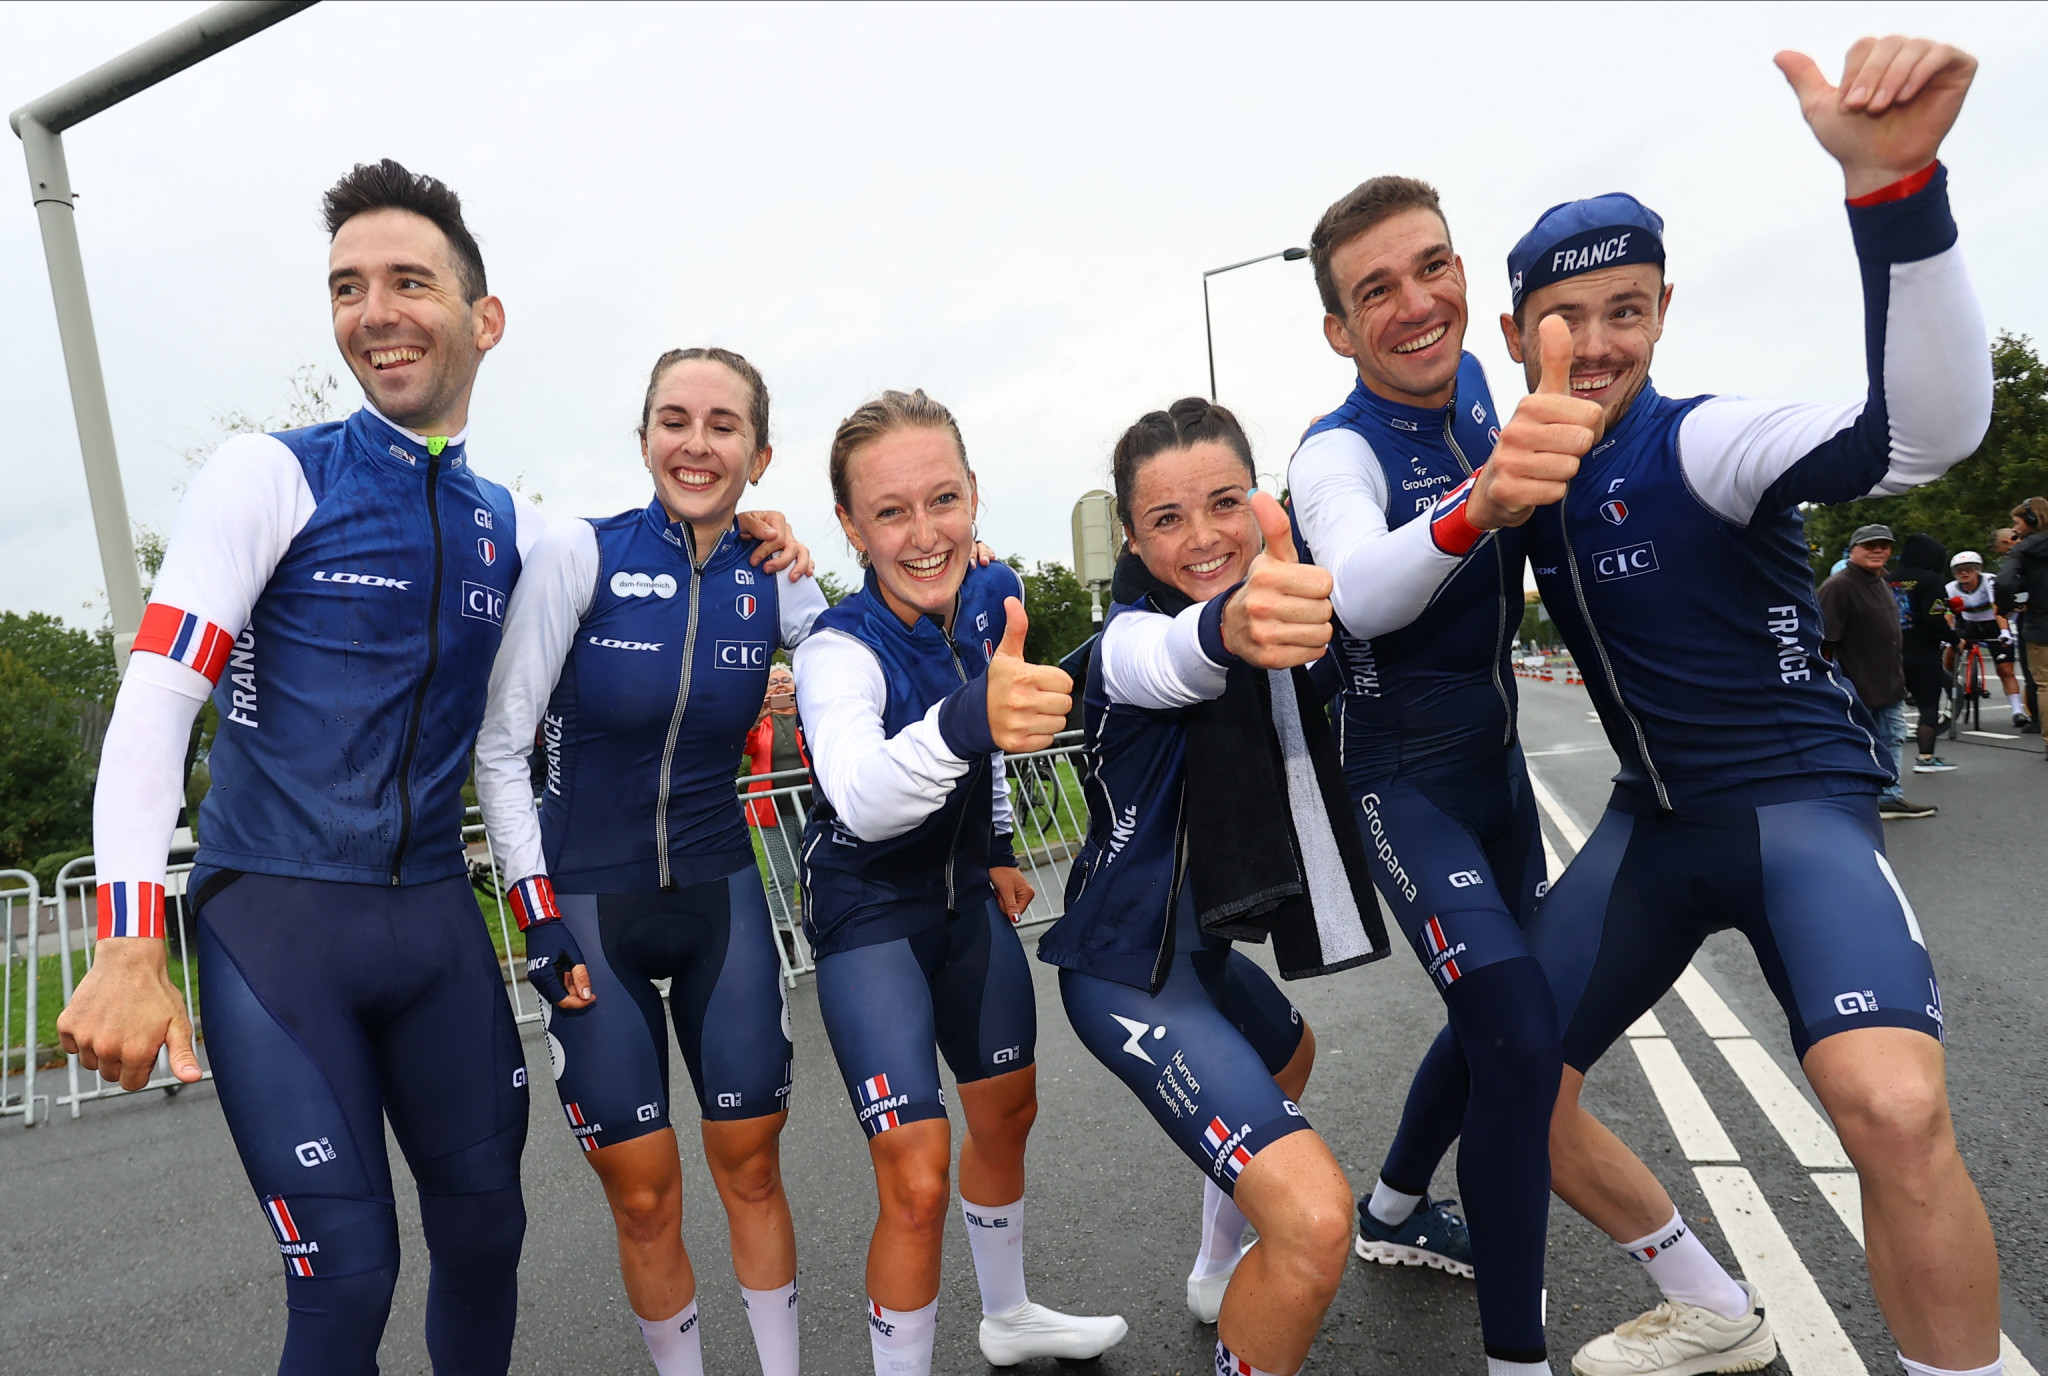 France edge Italy for mixed team relay gold at UEC Road European Championships